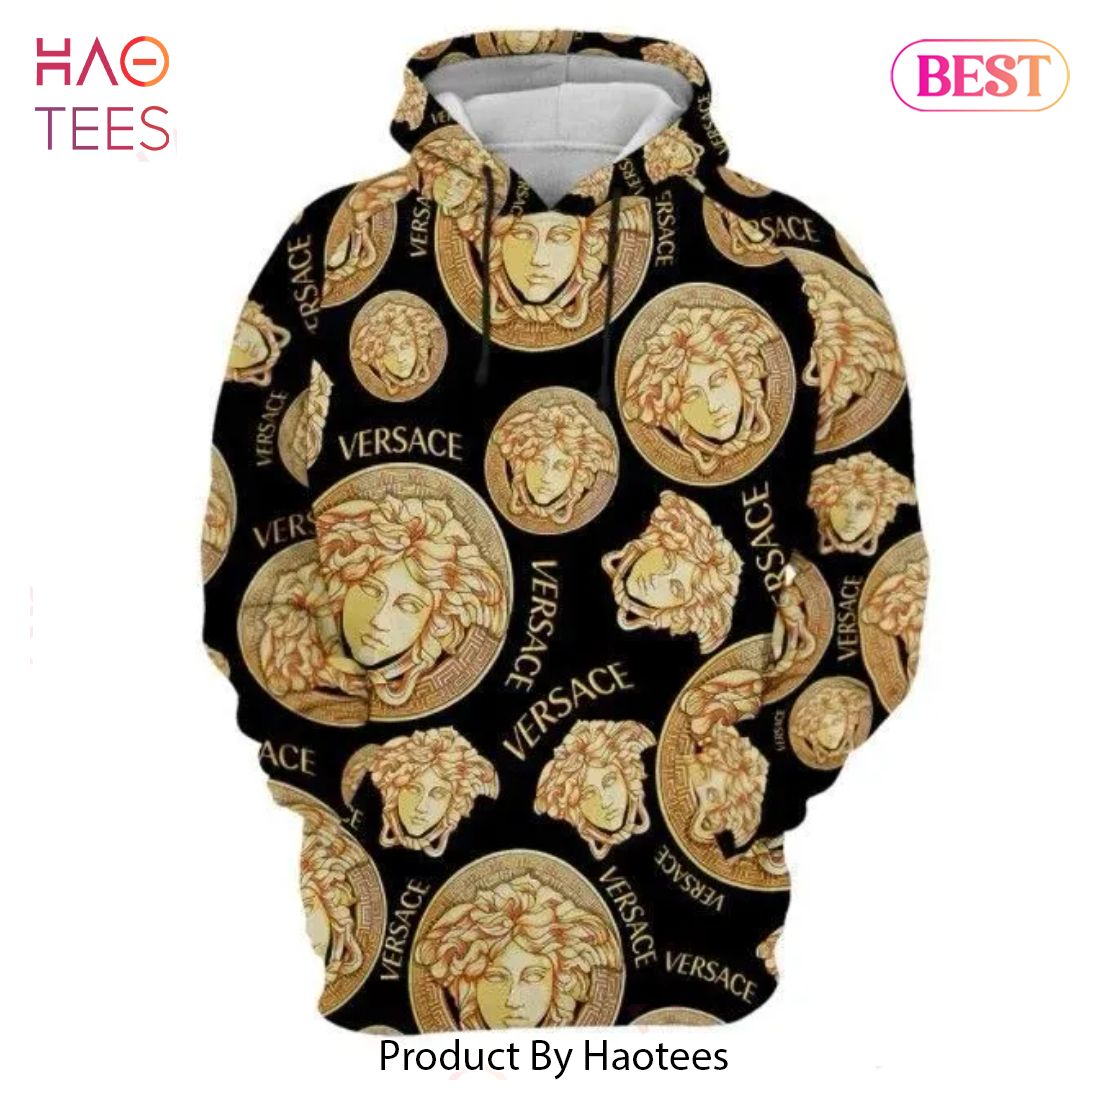 BEST FASHION] Gianni Versace Gold Unisex Hoodie For Men Women Luxury Brand Clothing  Clothes Outfit New